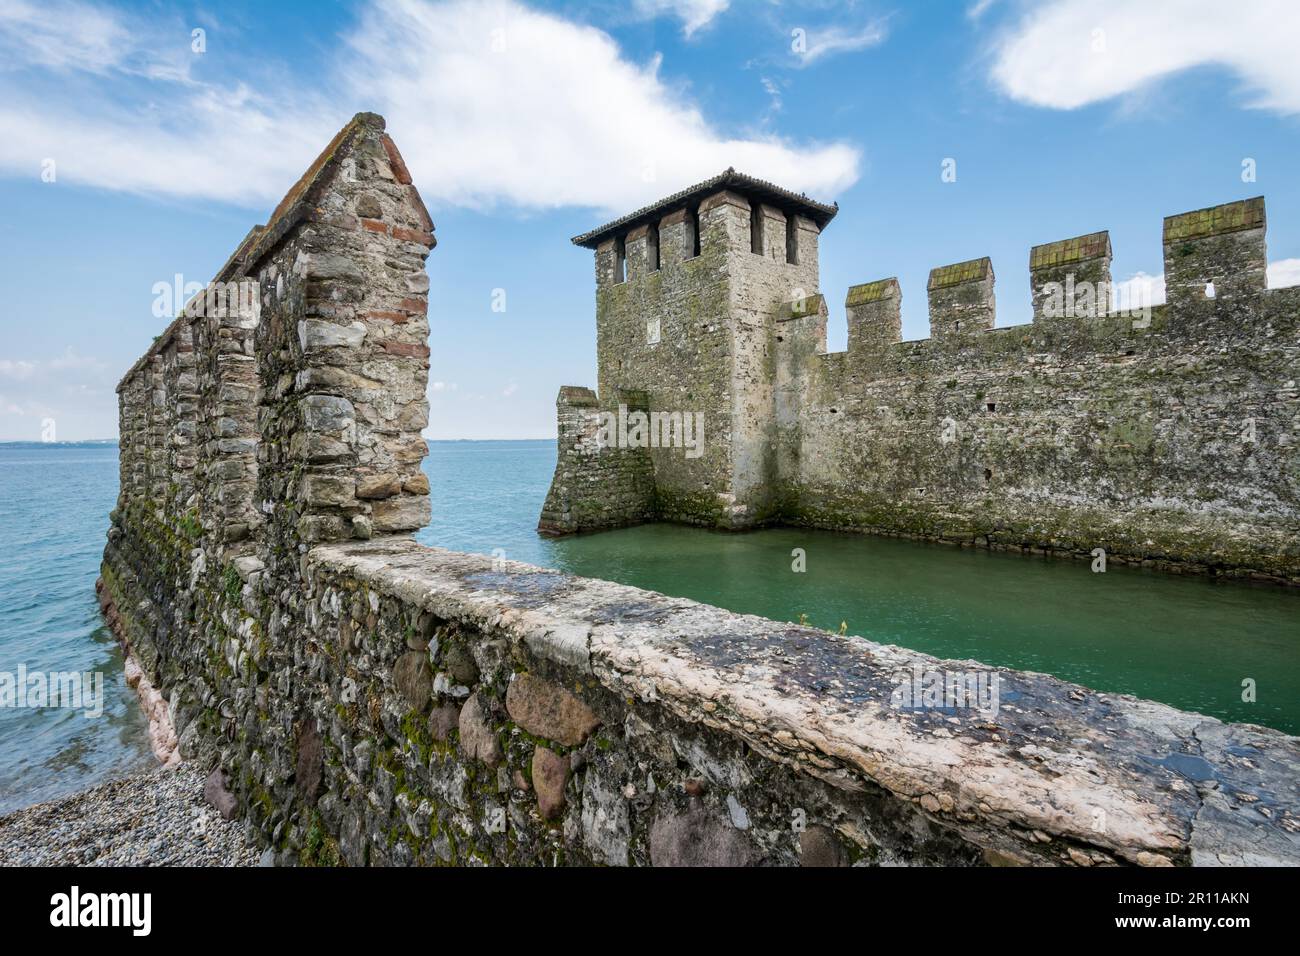 SIRMIONE, ITALY, APRIL 23: The Scaliger Caslte in Sirmione, Italy on April 23, 2014. The famous castle was built in the 13th century. Foto taken from Stock Photo